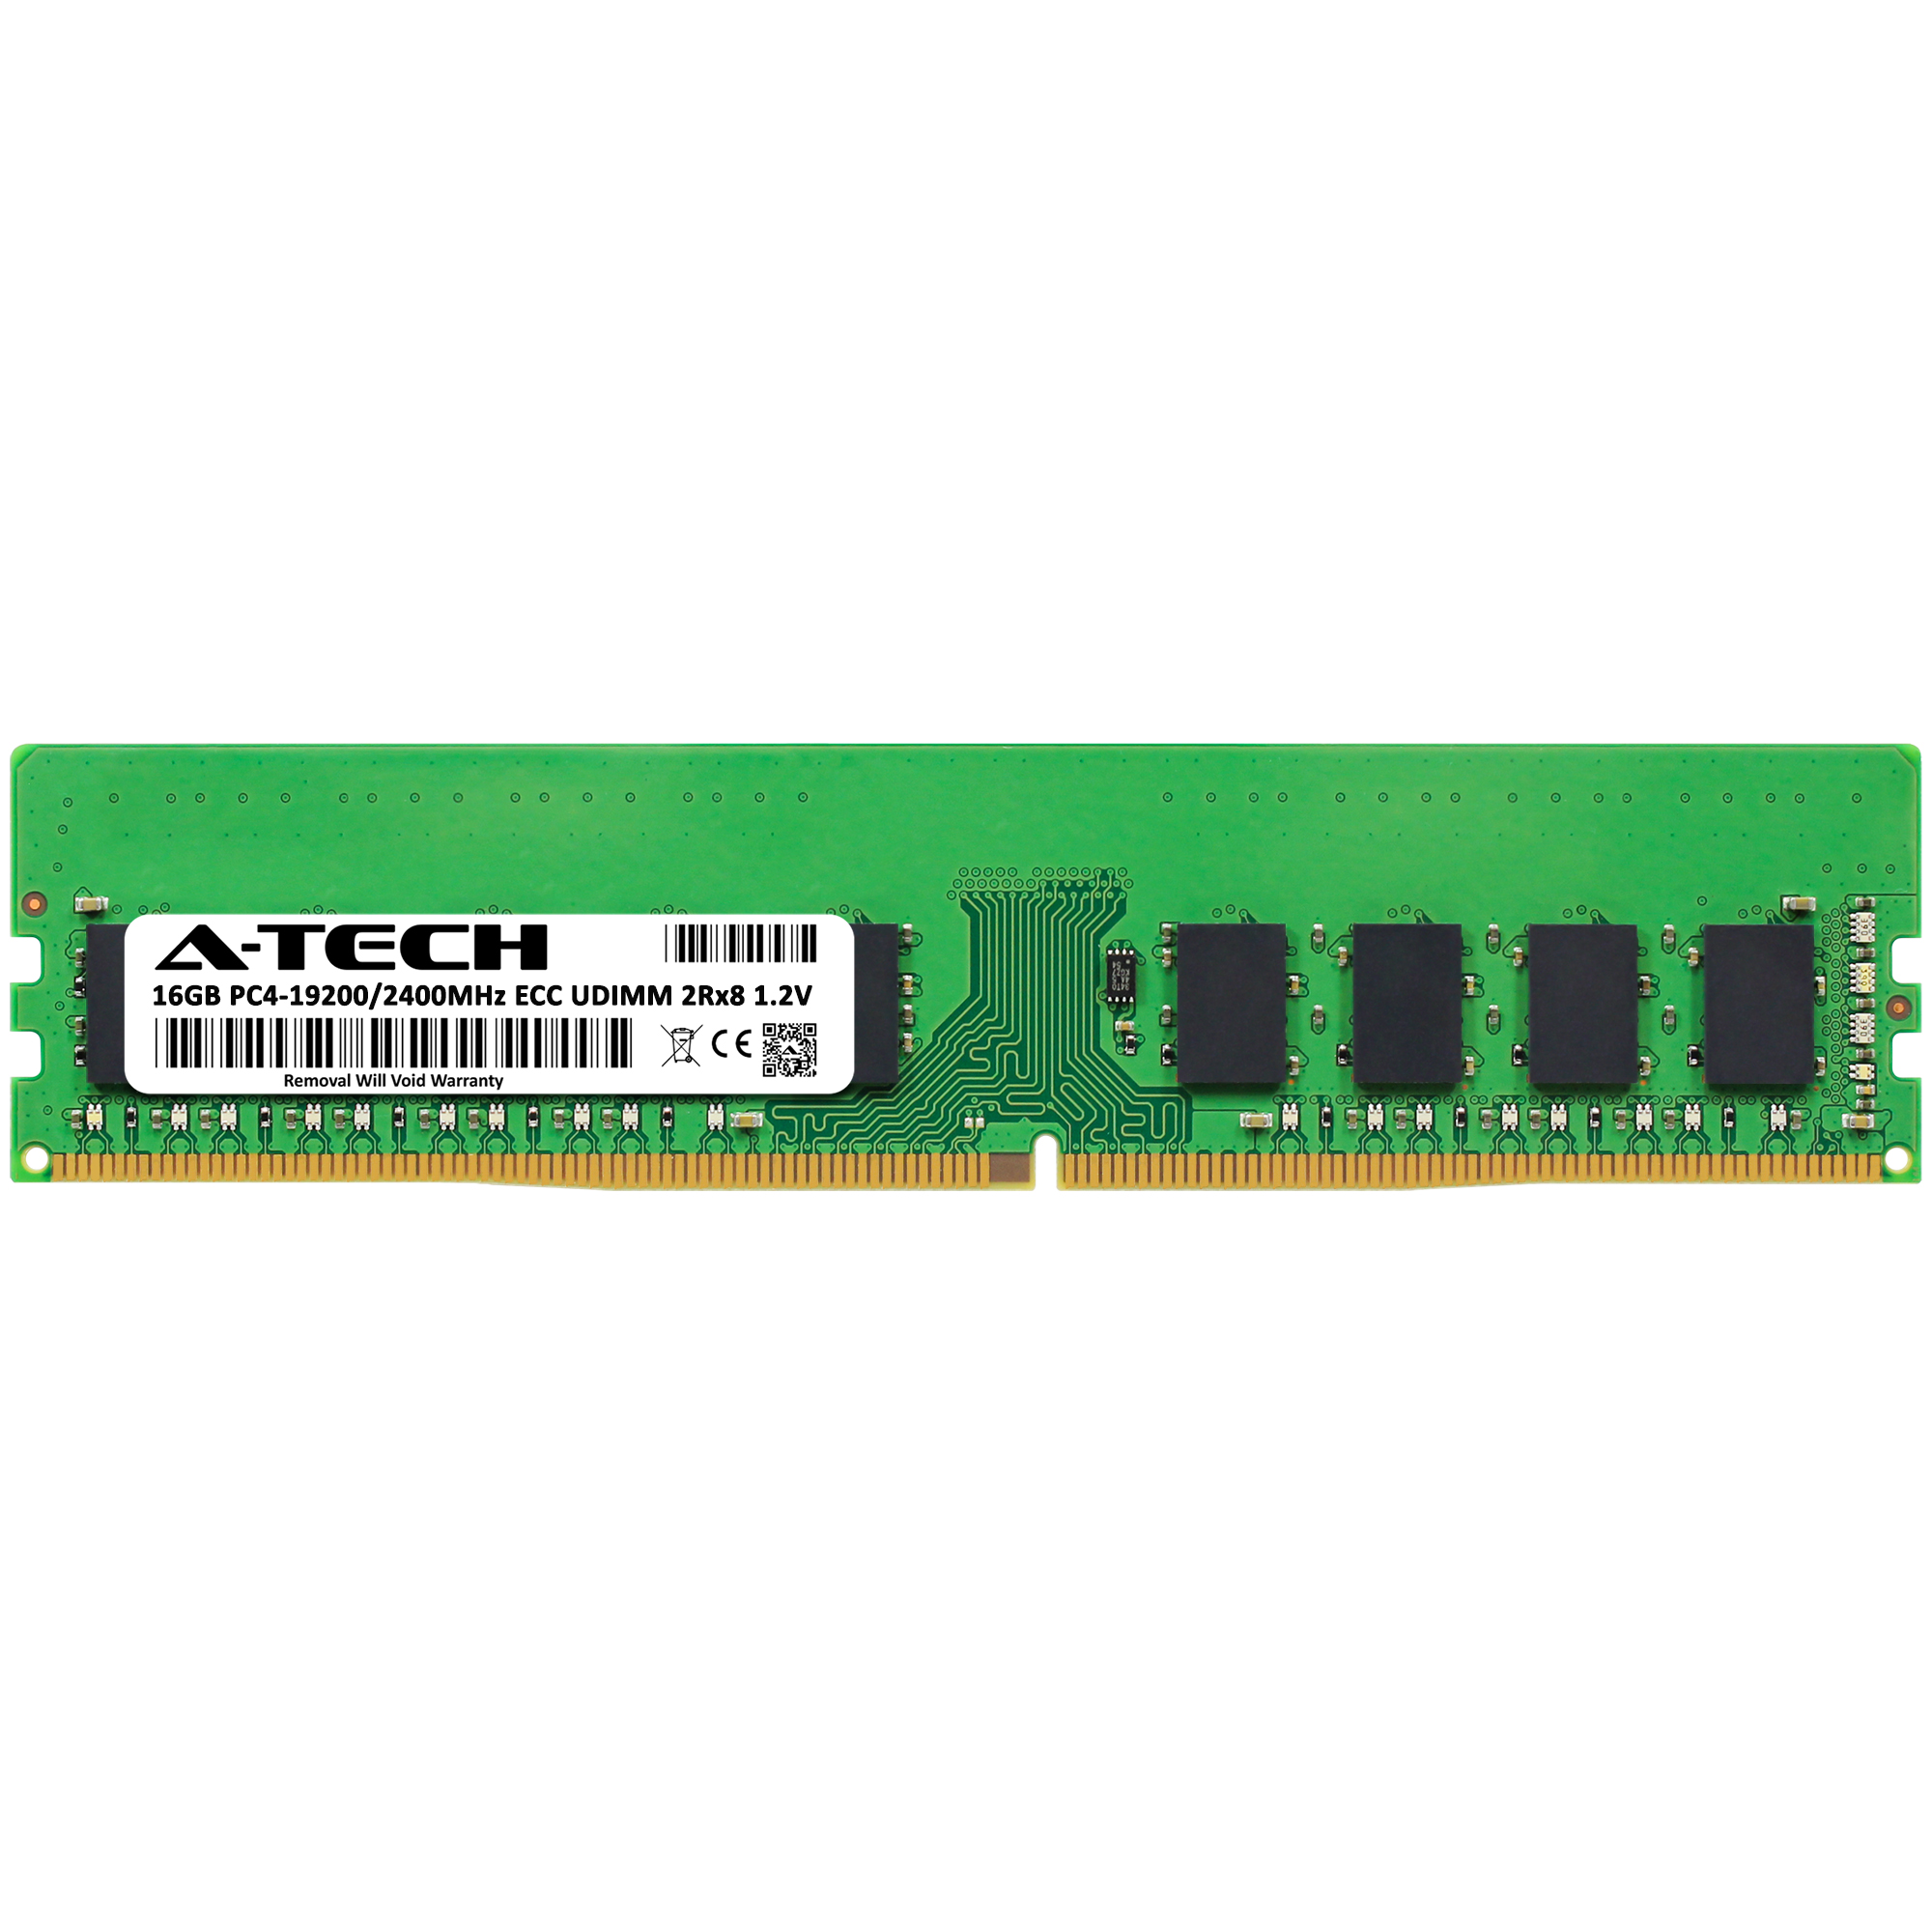 DDR4 2400MHz PC4-19200 ECC Unbuffered UDIMM 2rx8 1.2v A9755388-ATC Single Server Memory Ram Stick A-Tech 16GB Replacement for Dell A9755388